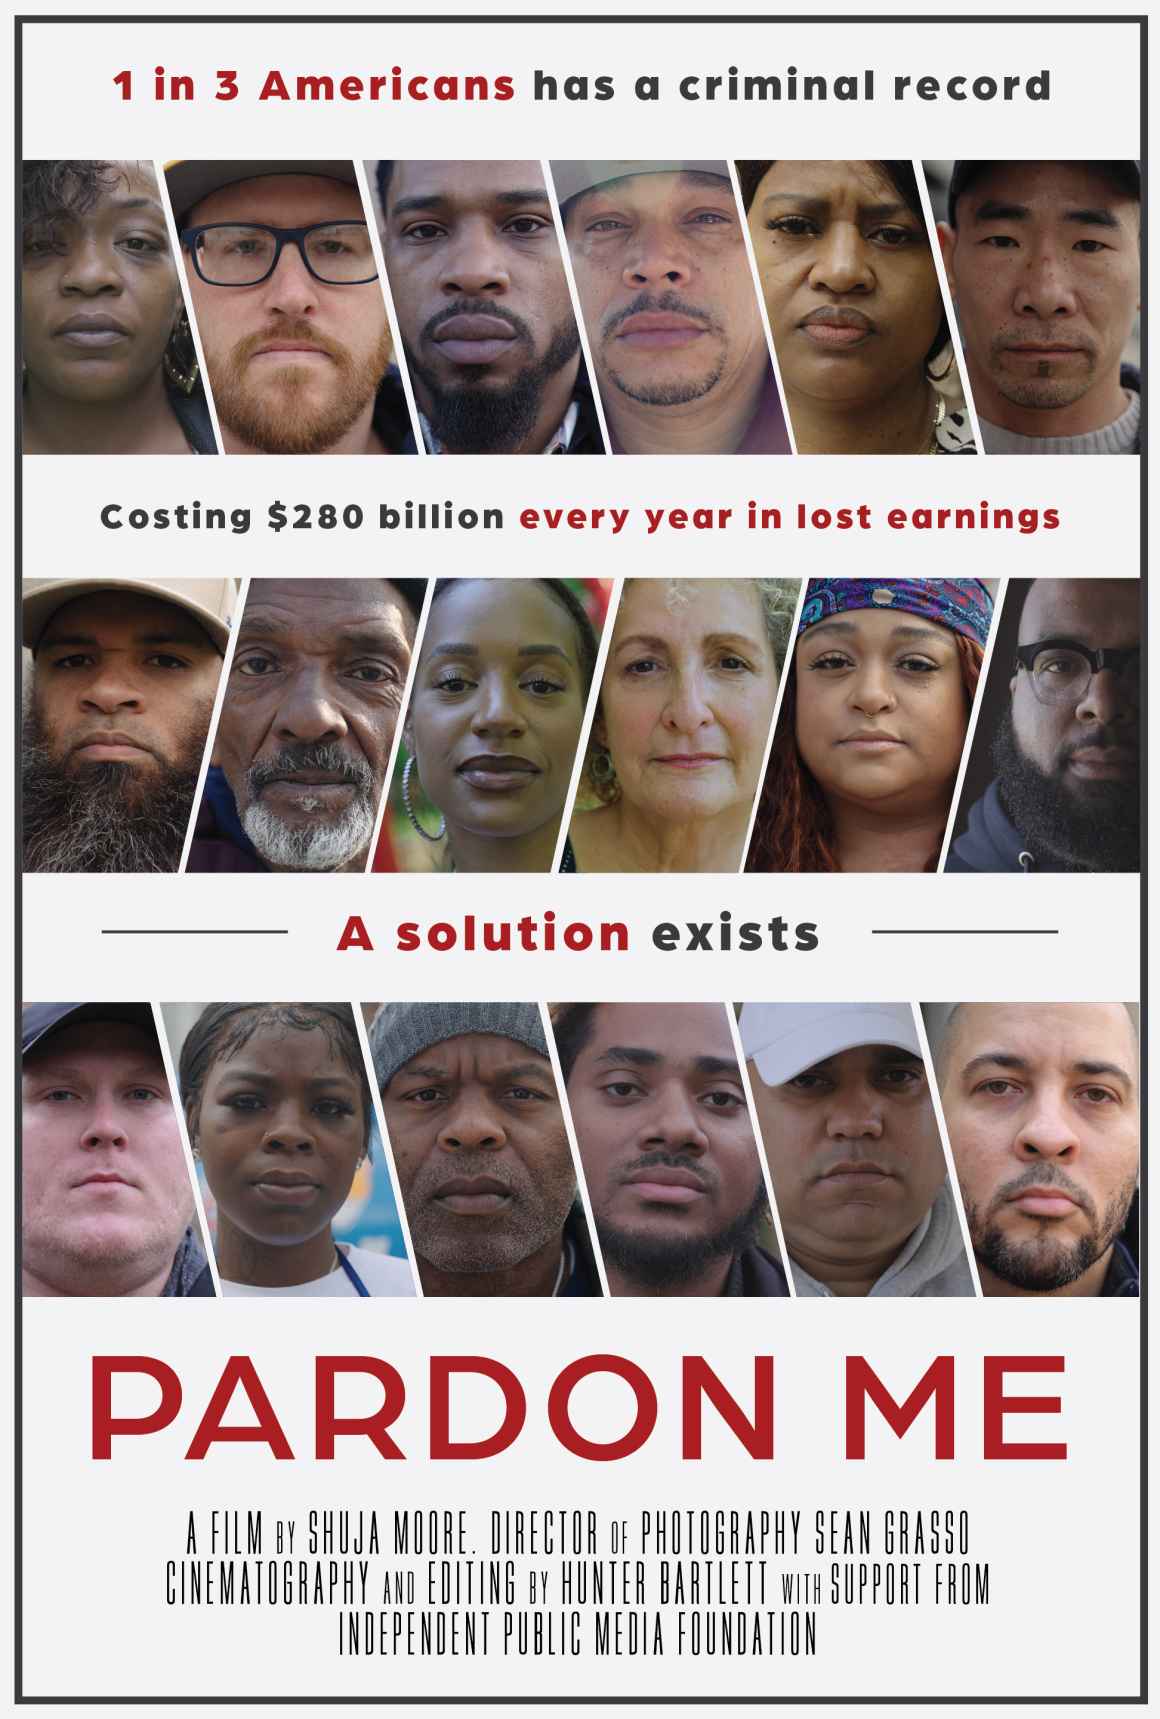 A series of faces looking at a camera on a documentary poster. 